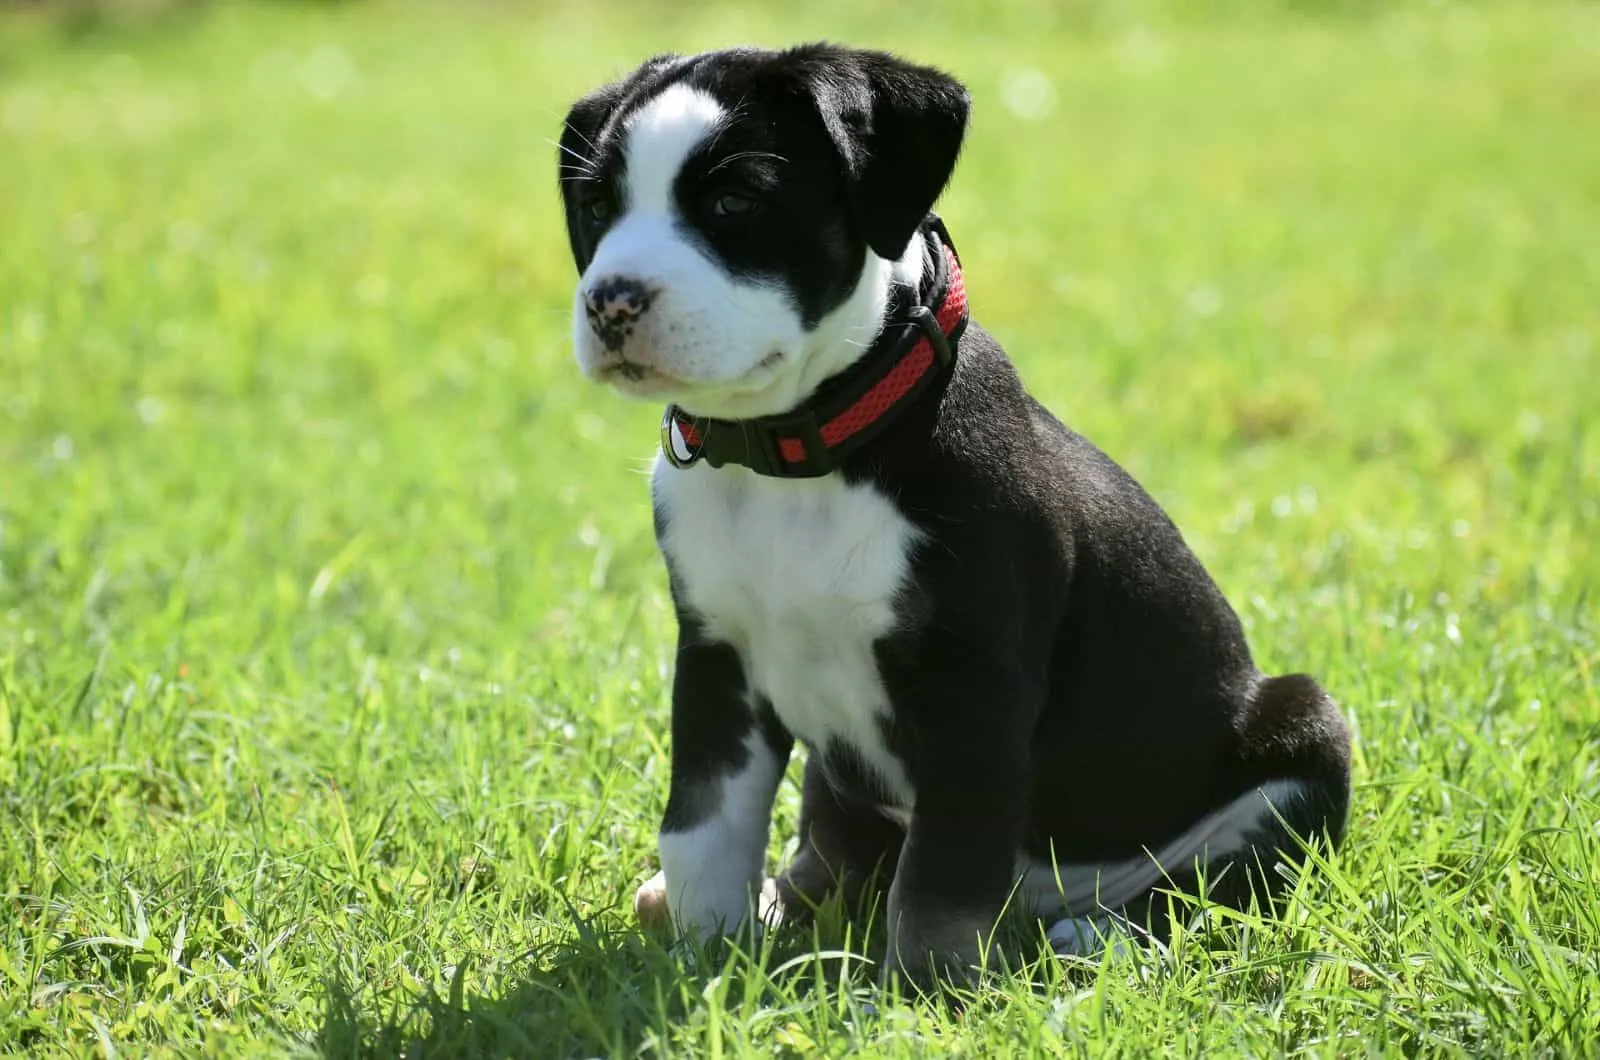 American bully puppy with collar sitting on grass